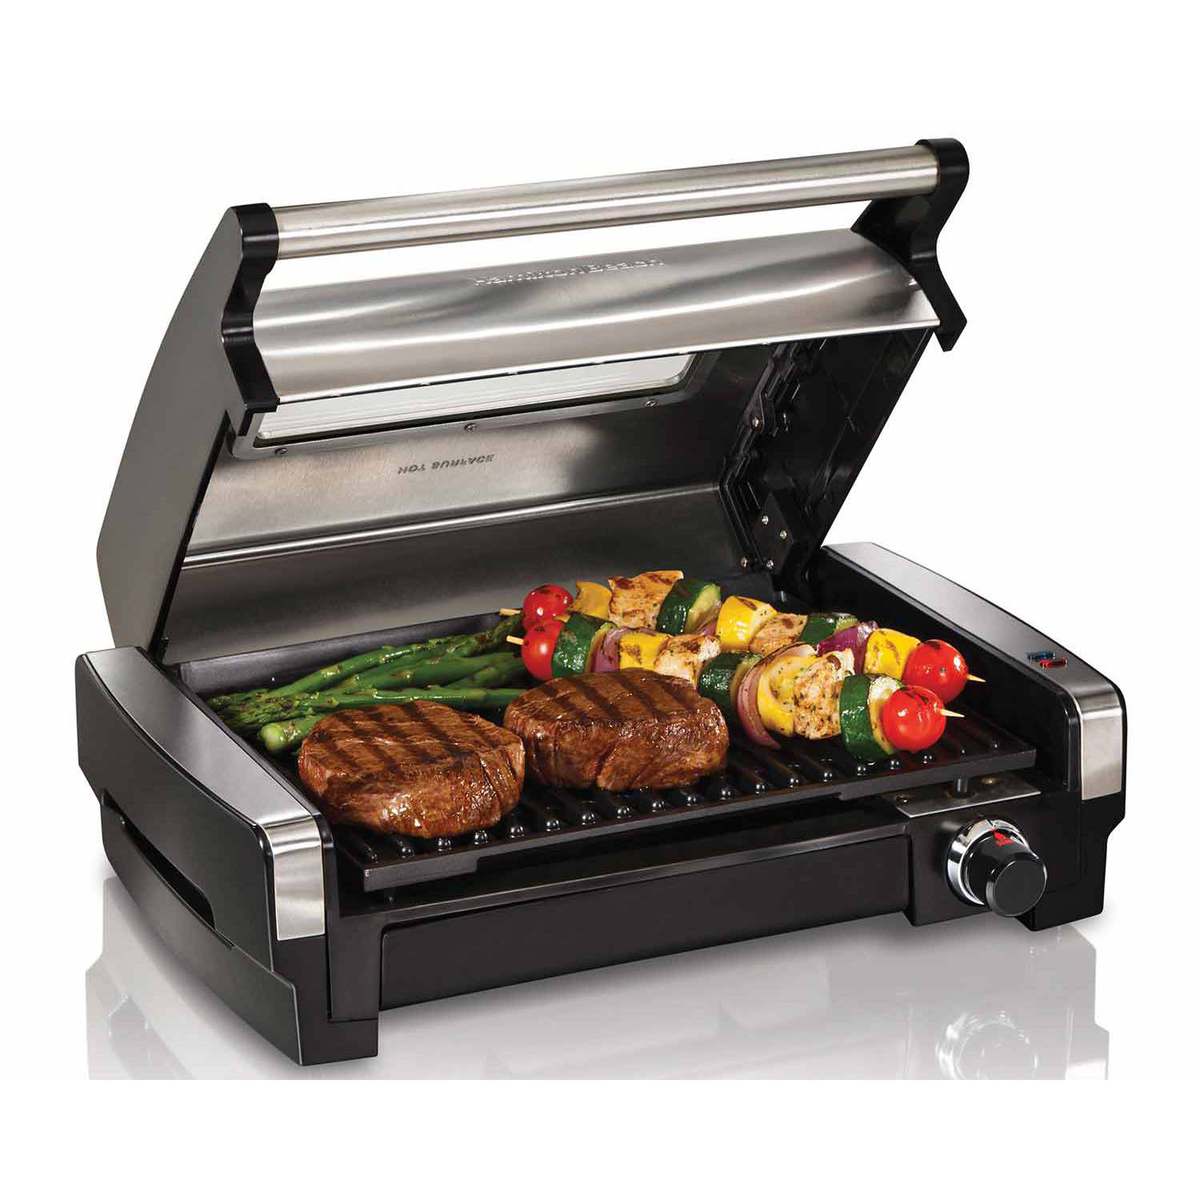 Searing Grill with Lid Window (25361G)